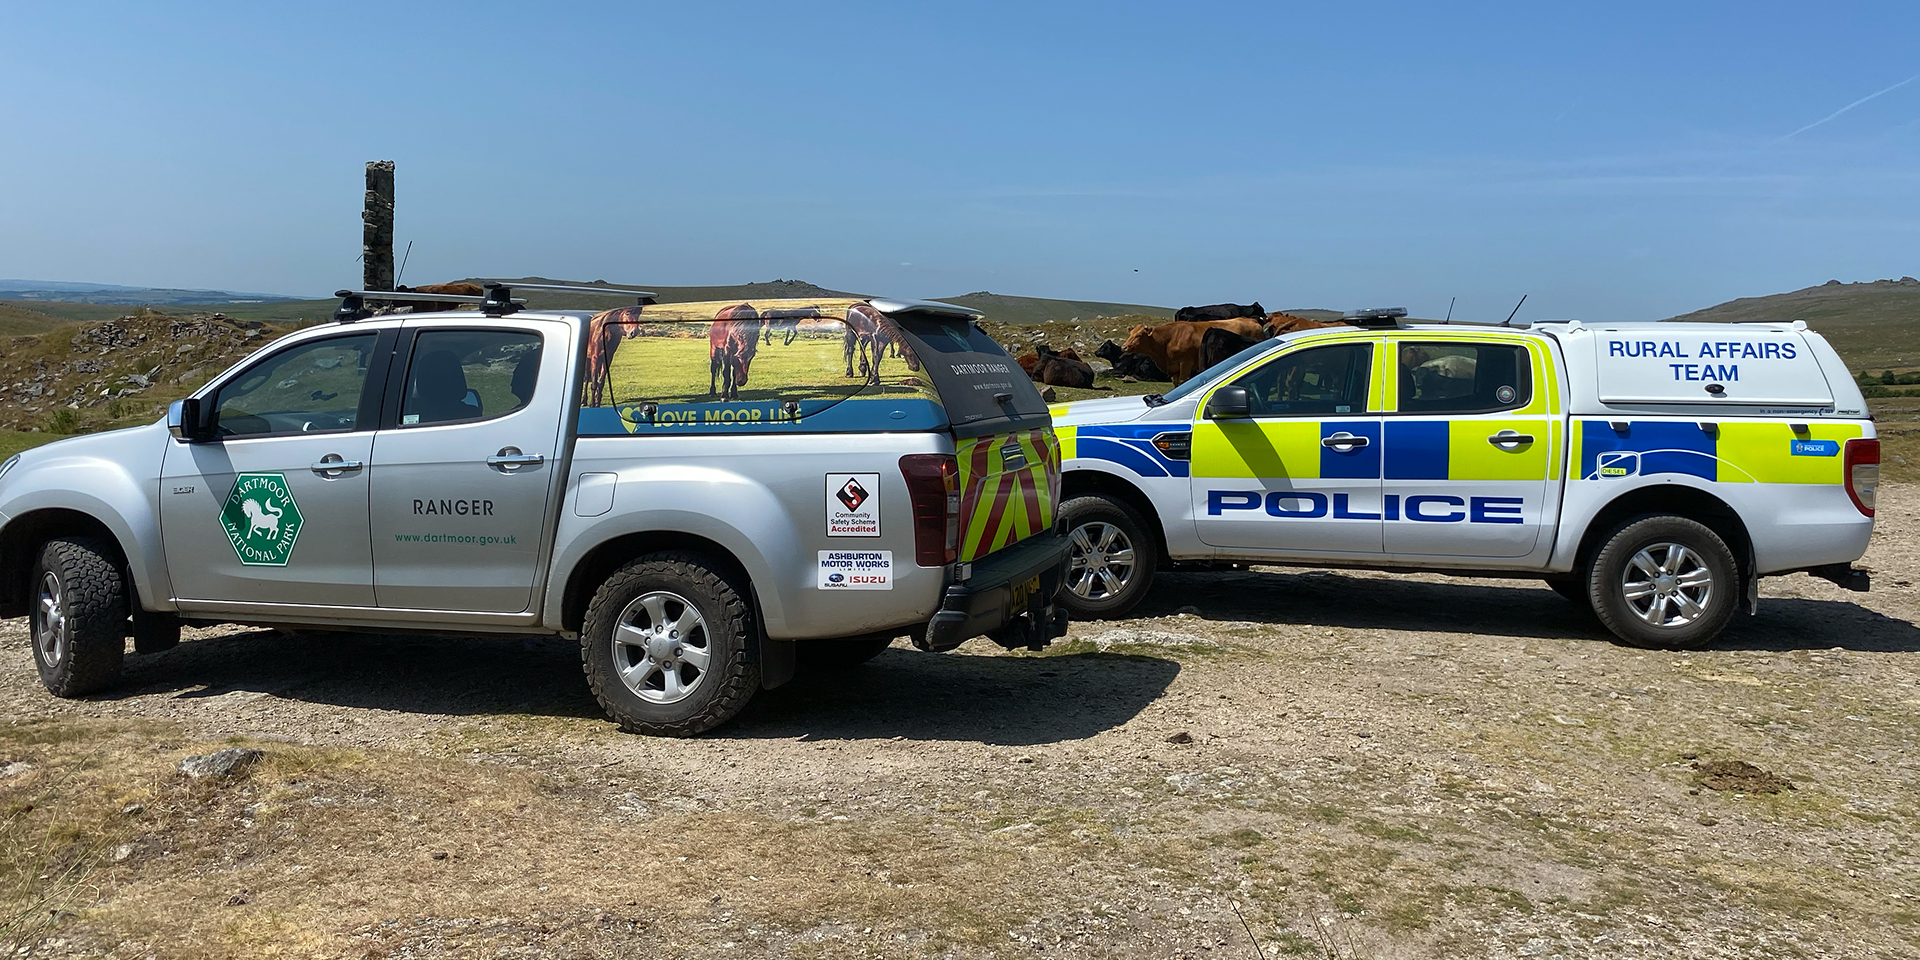 Ranger Vehicle and Police rural affairs team parked on the moor